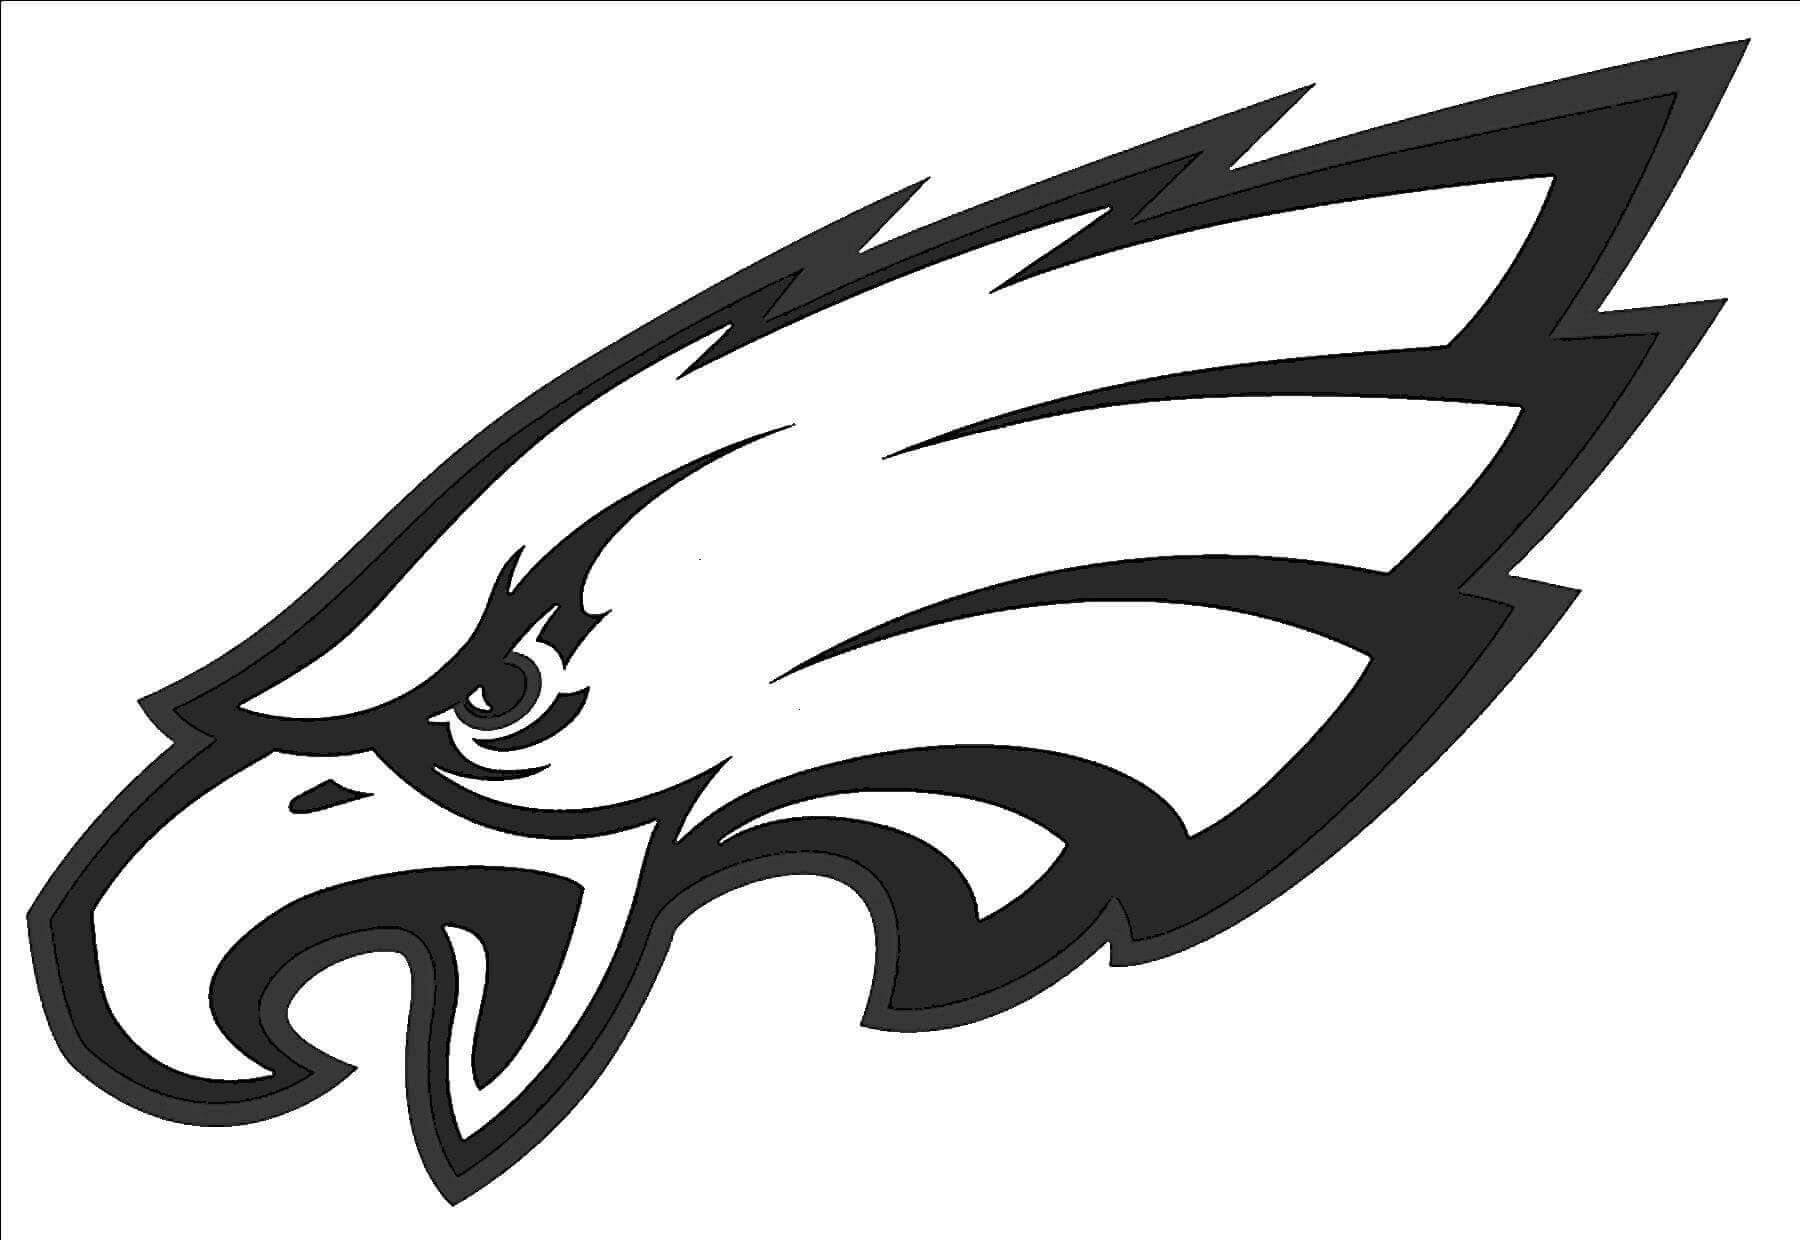 Printable Nfl Team Logo Coloring Pages